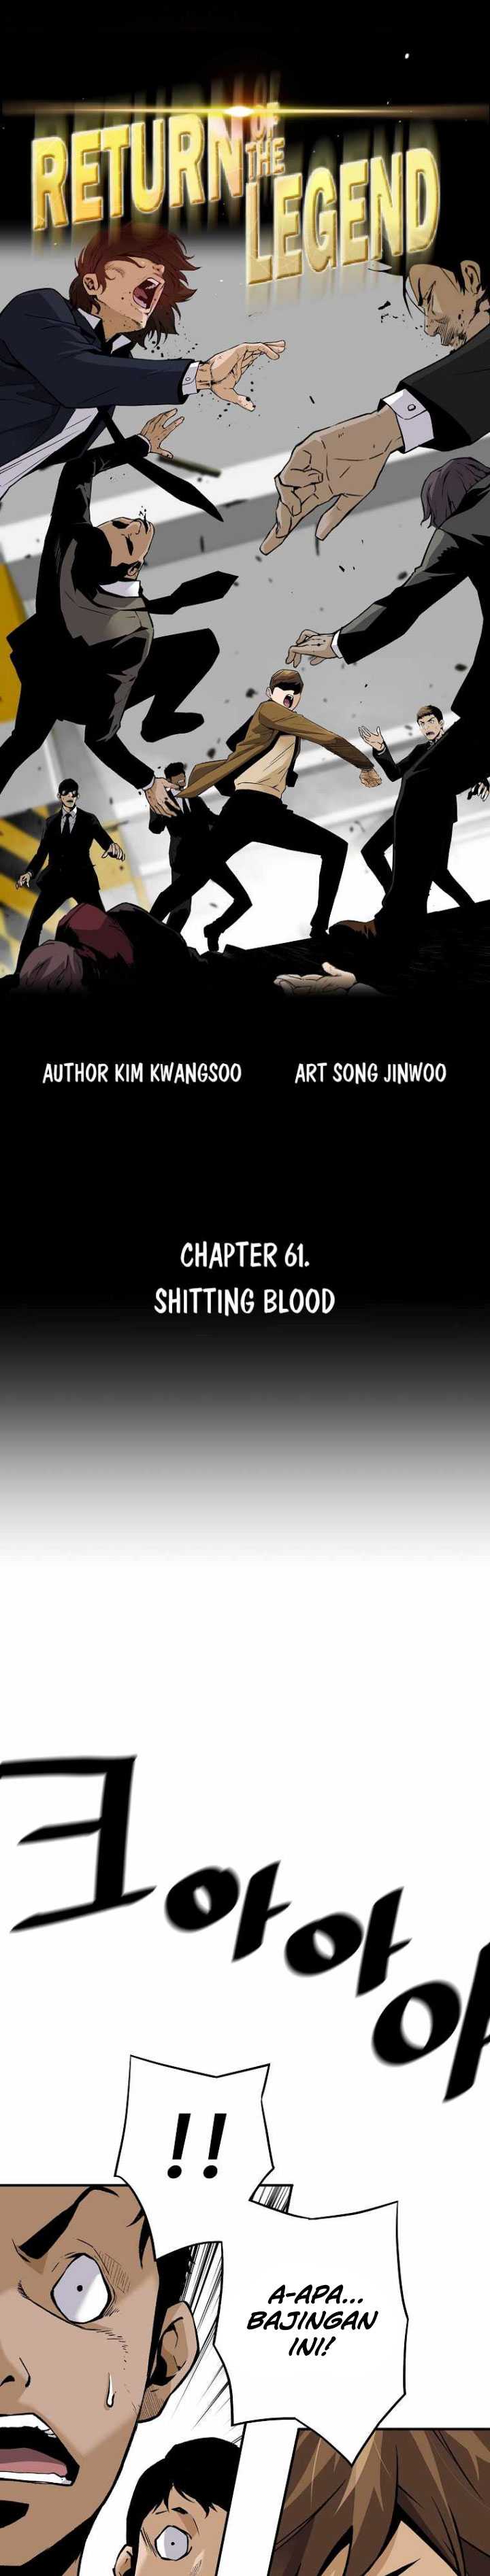 Return of the Legend Chapter 61